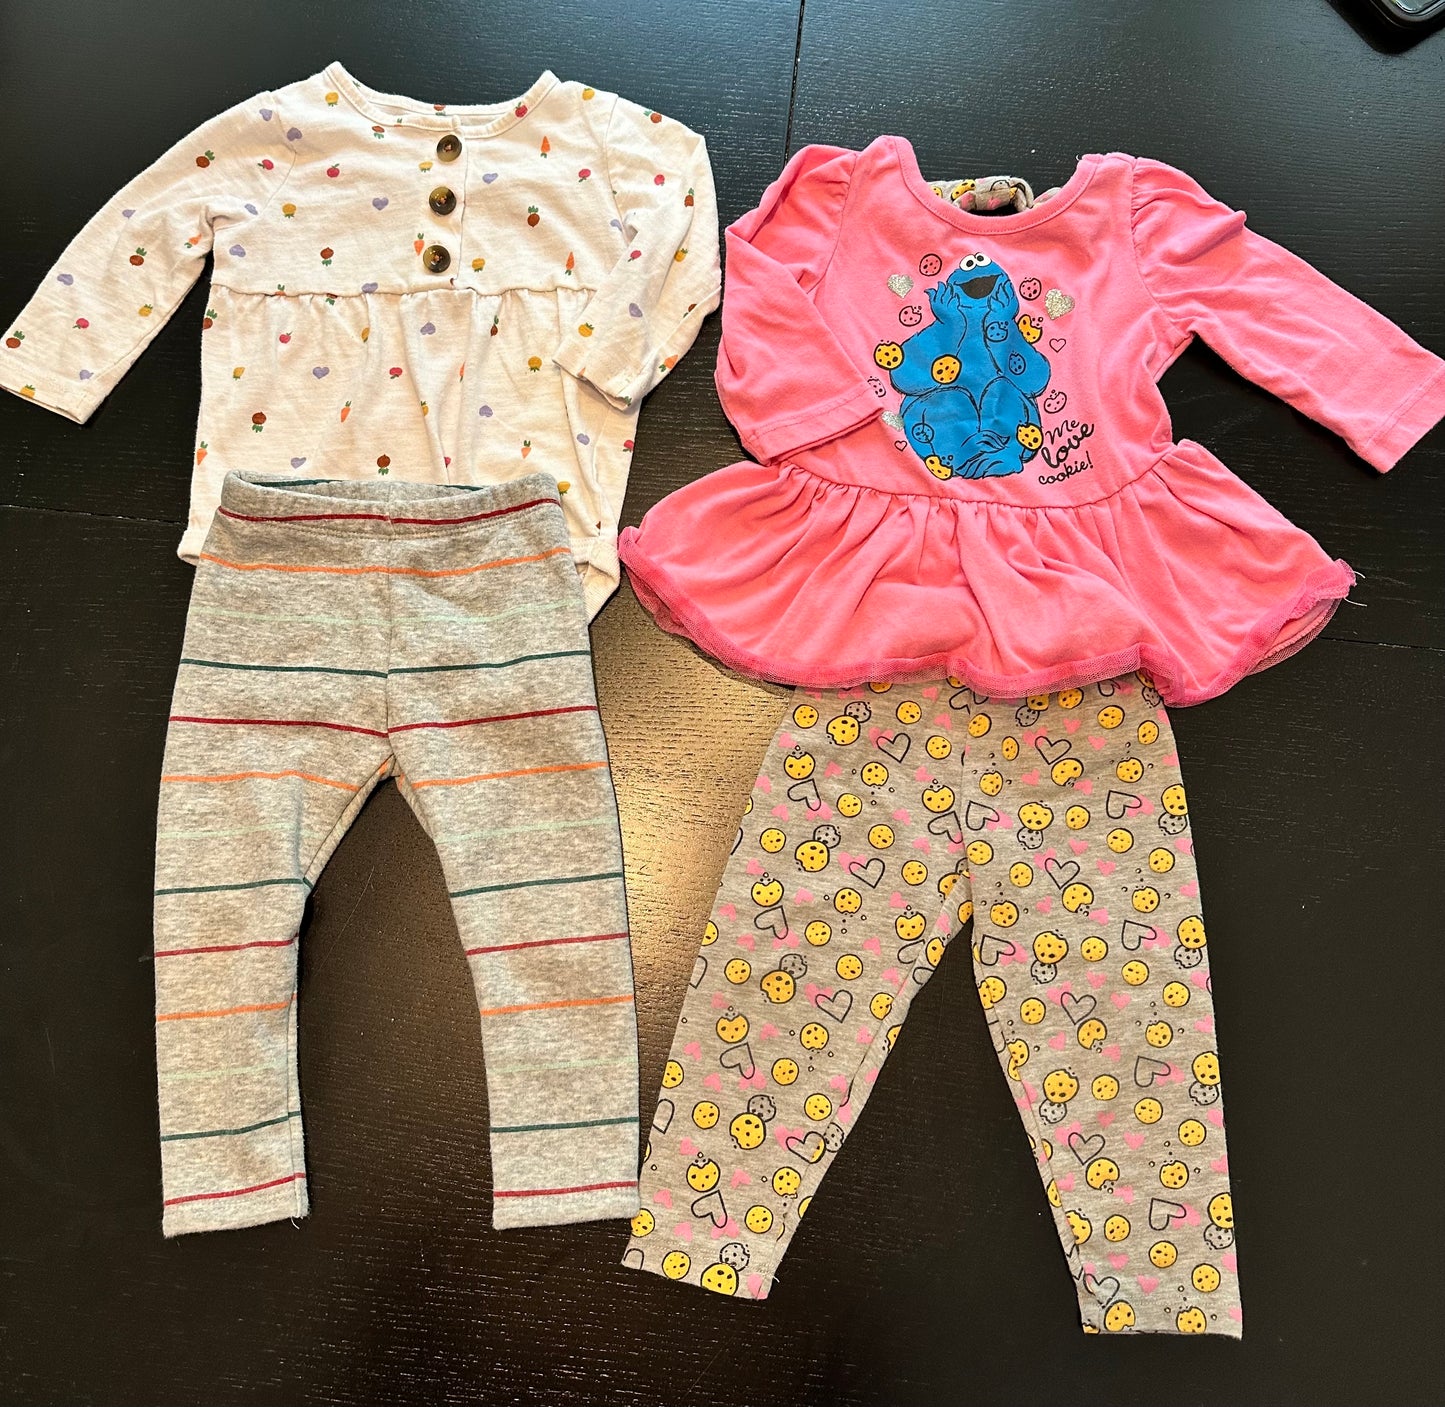 12 Month Girl's Bundle (17 Items)